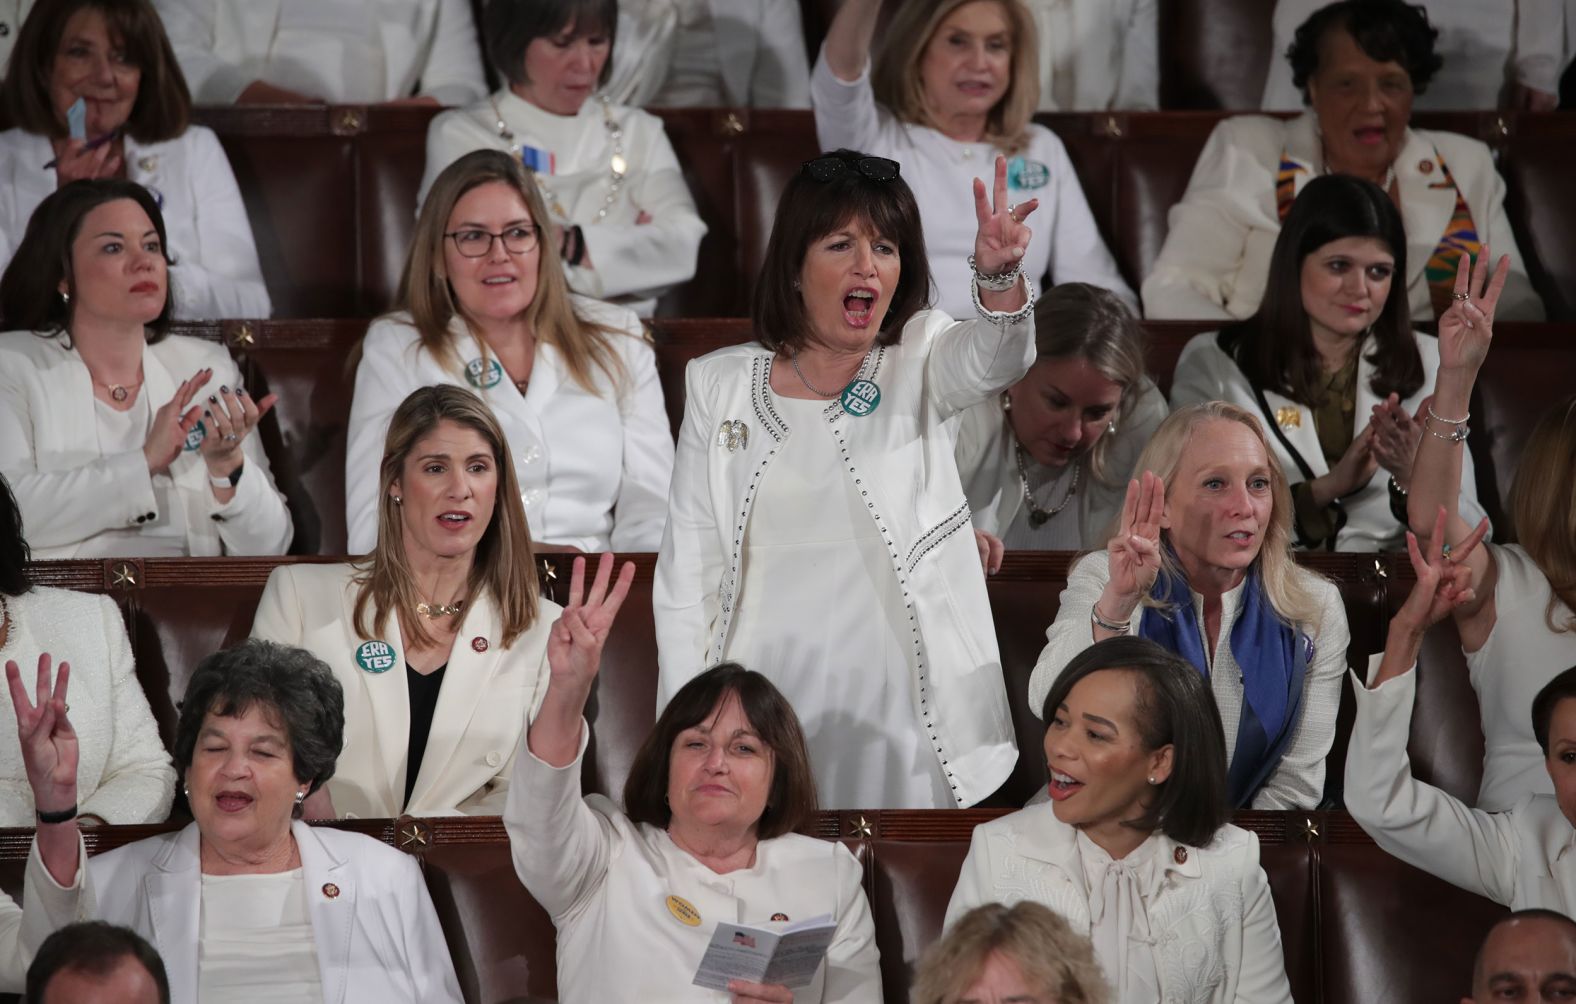 US Rep. Jackie Speier leads an "HR3" chant during the speech. Trump urged lawmakers to come up with legislation to lower prescription drug prices, and some Democrats <a href="https://www.cnn.com/politics/live-news/state-of-the-union-2020/h_47698669281ddf69326acef3ad9d1f80" target="_blank">responded with the chant.</a> HR3, now titled the Elijah E. Cummings Lower Drug Costs Now Act, would empower the health and human services secretary to negotiate annually for the best prices on at least 50 costly brand-name drugs and up to 250 medications, including insulin.